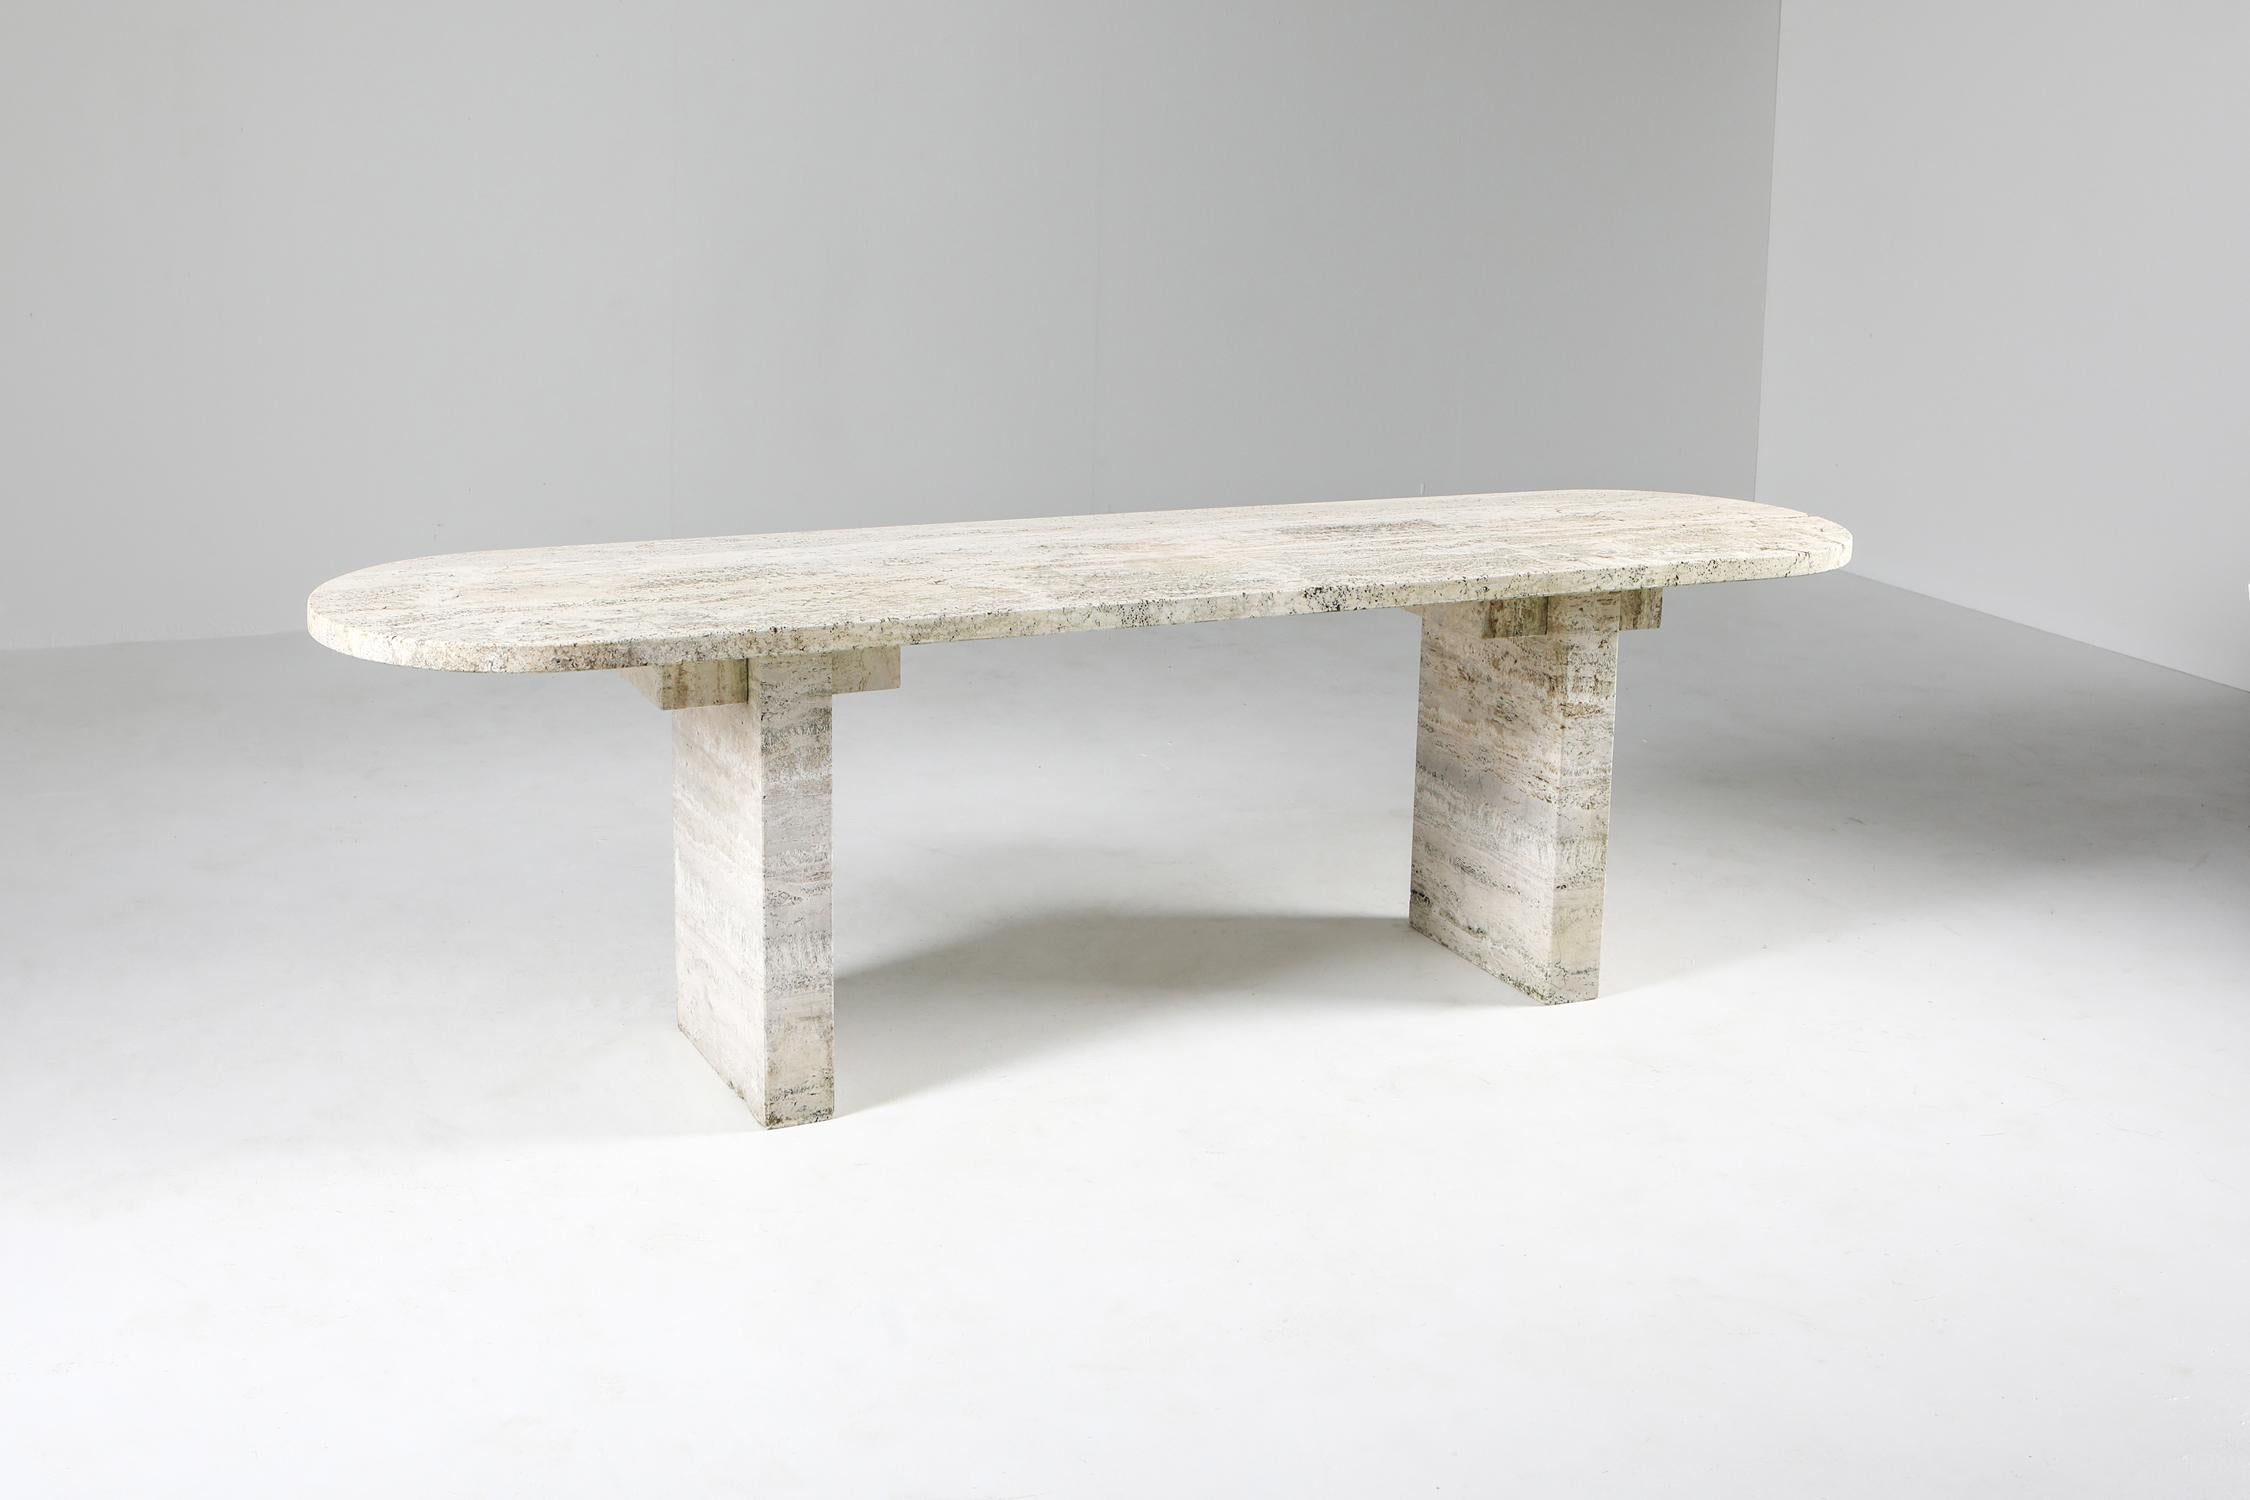 Brutalism, minimalism, travertine, dining or console table, oval, France, 1970s

Gorgeous thick slabs of travertine in an elegant no nonsense shape.
Less is more is certainly the case here.
It's a very white type of travertine, the most